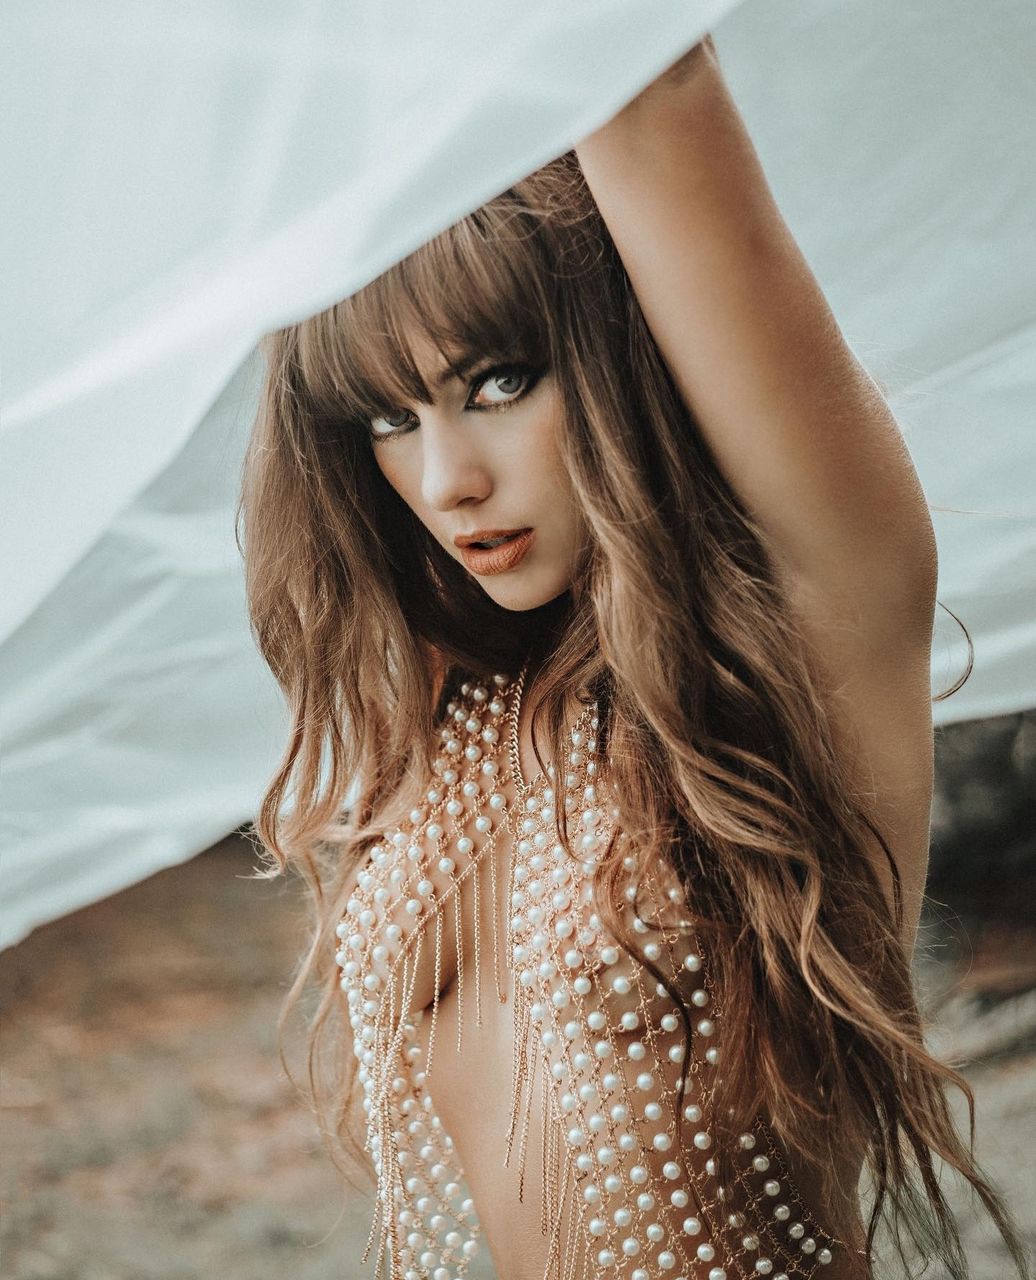 one person, long hair, women, hairstyle, young adult, adult, portrait, human hair, fashion, brown hair, clothing, photo shoot, blond hair, looking at camera, dress, waist up, female, nature, looking, front view, indoors, lifestyles, glamour, elegance, arts culture and entertainment, limb